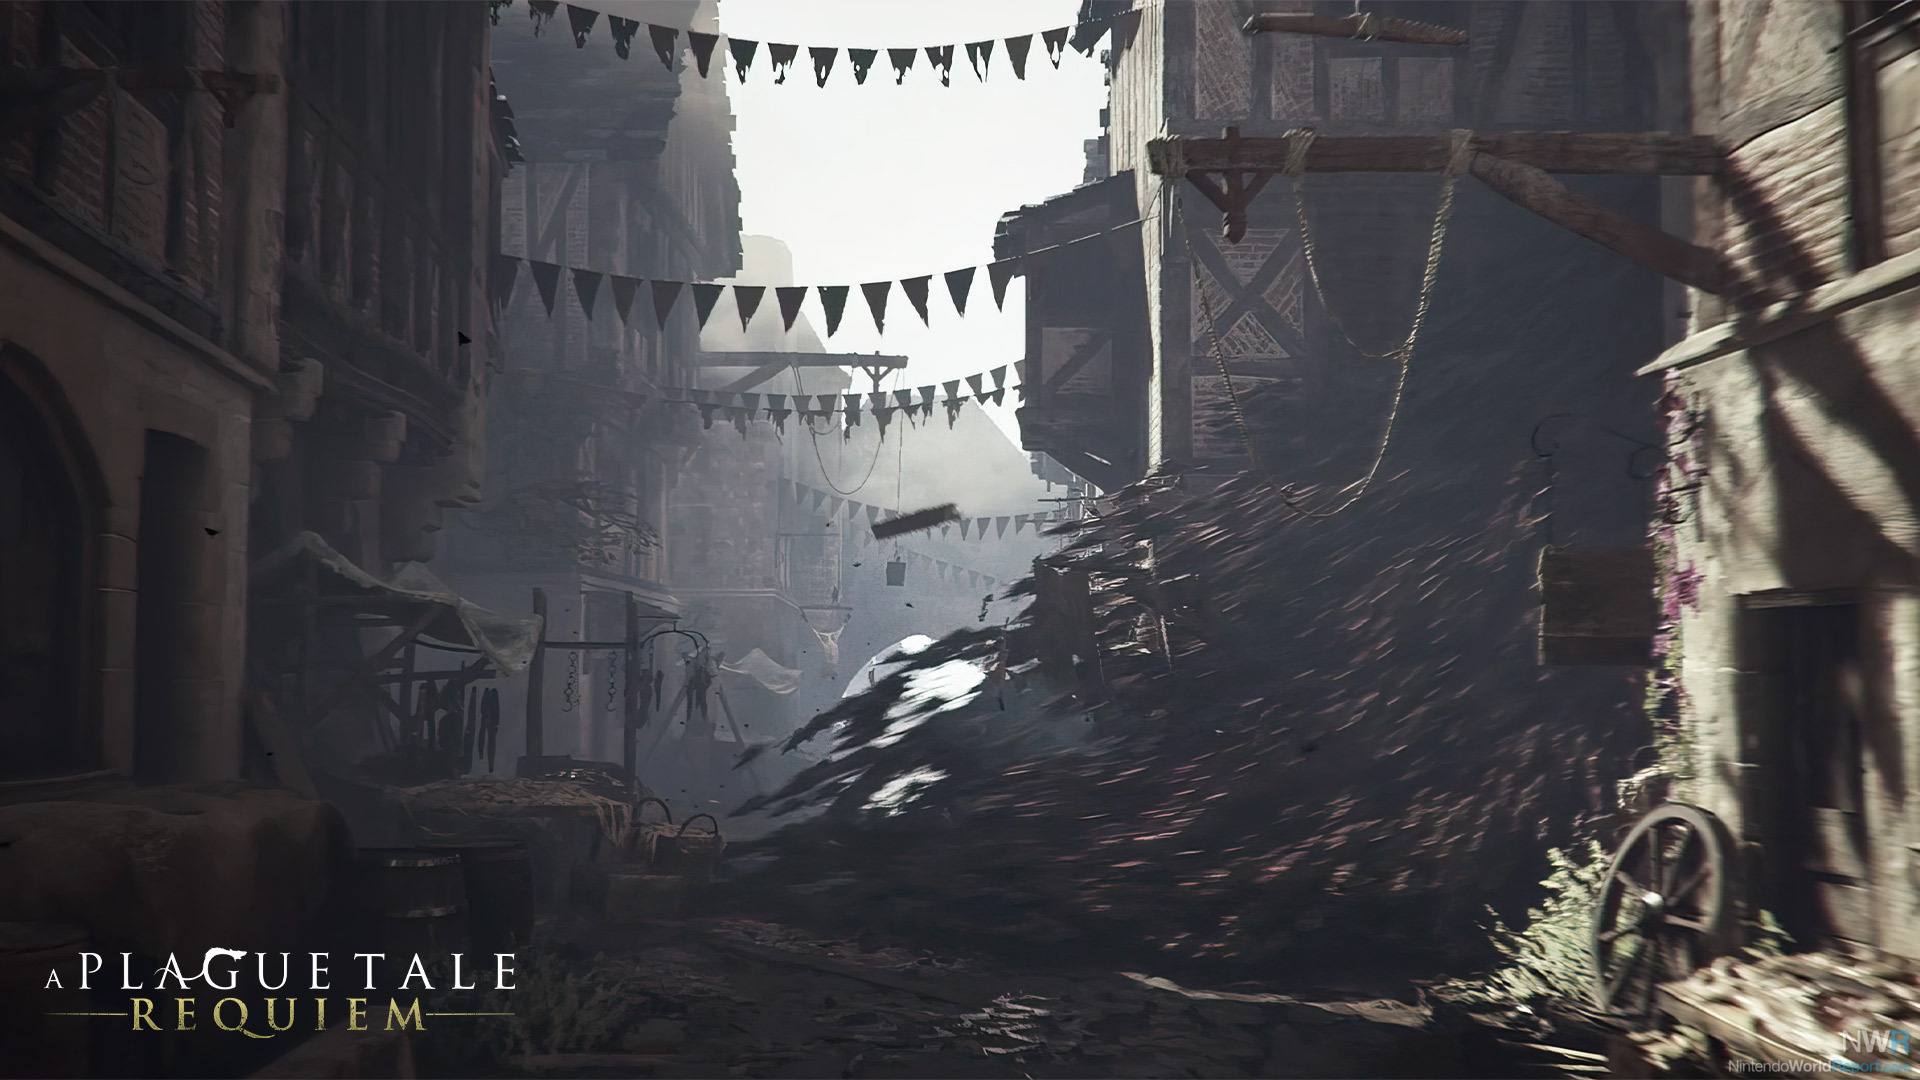 A Plague Tale: Requiem will easily take the title of this year's